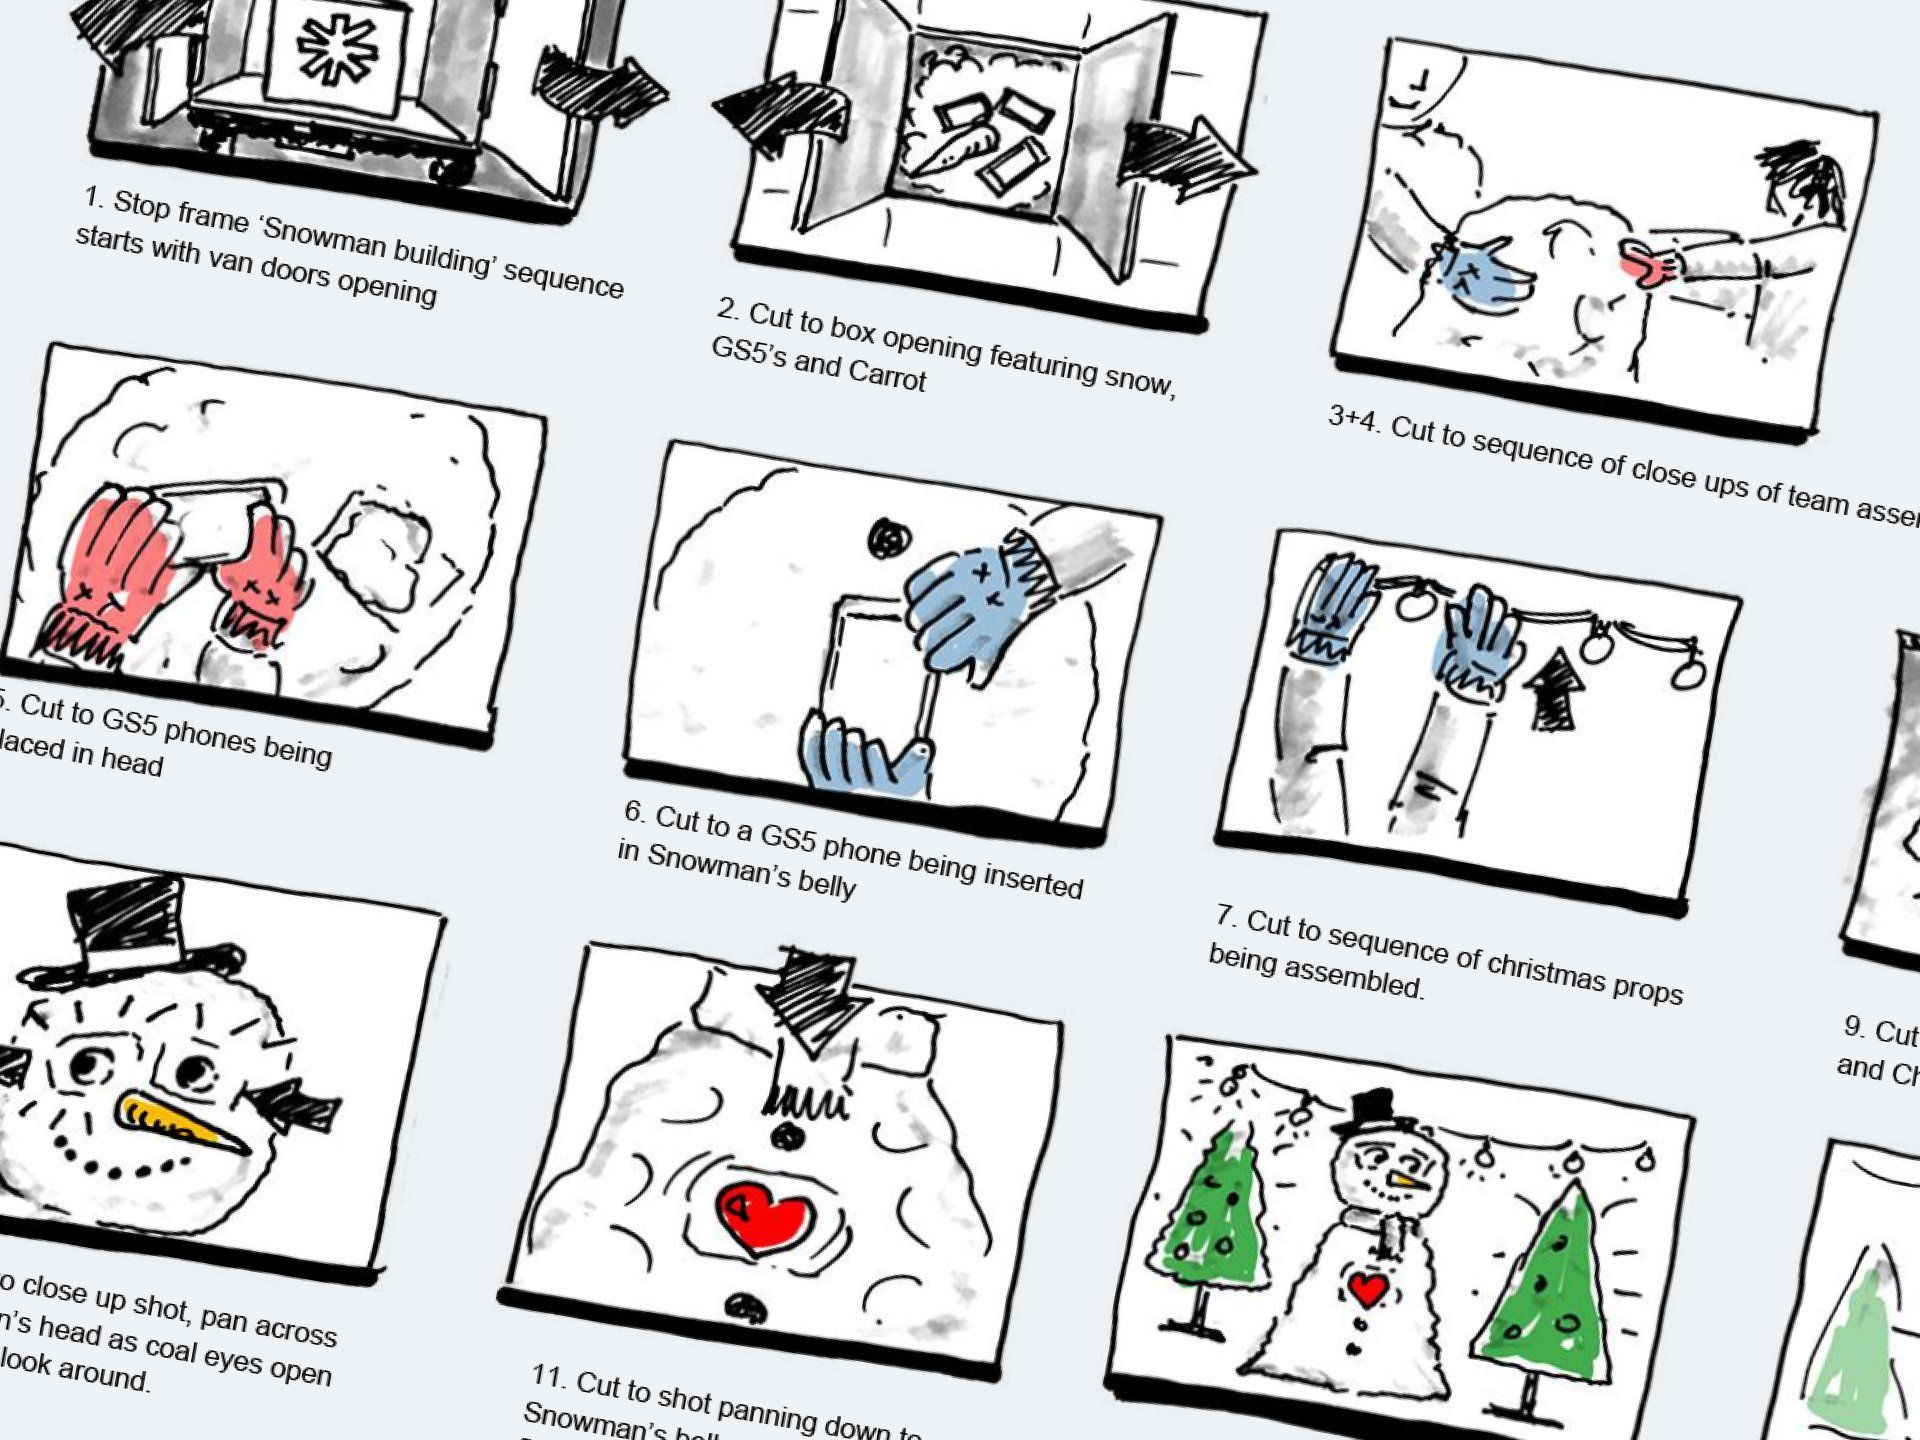 Storyboard for a promotional video Christmas card highlighting the waterproof capabilities of the Samsung Galaxy S5. © The Animo Group Ltd.